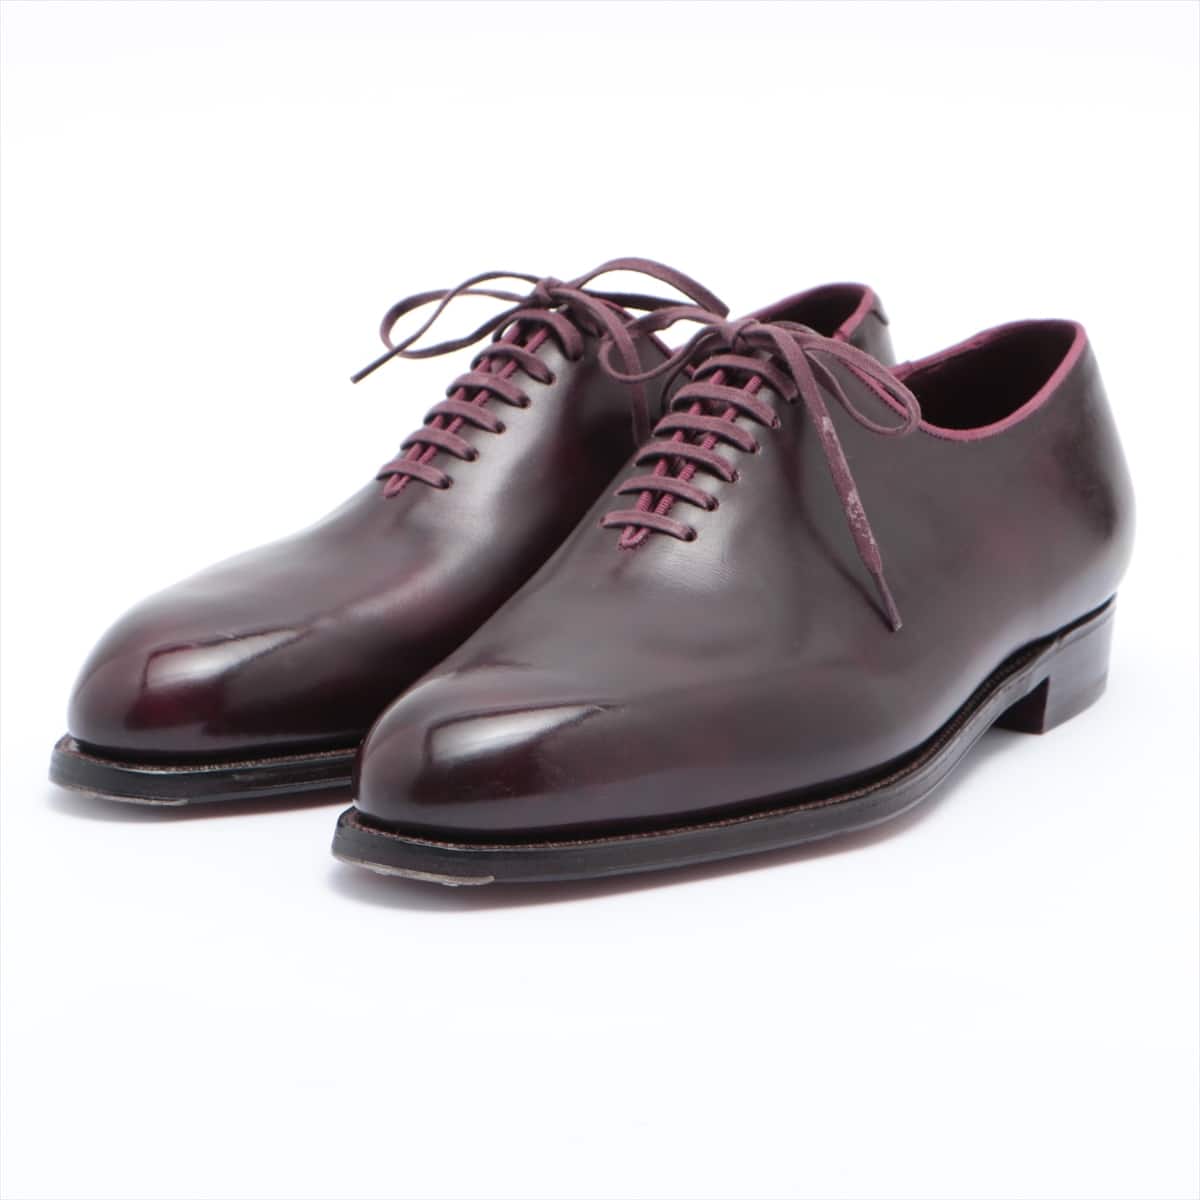 J. M. Weston Leather Leather shoes 8 Men's Brown One Piece Oxford